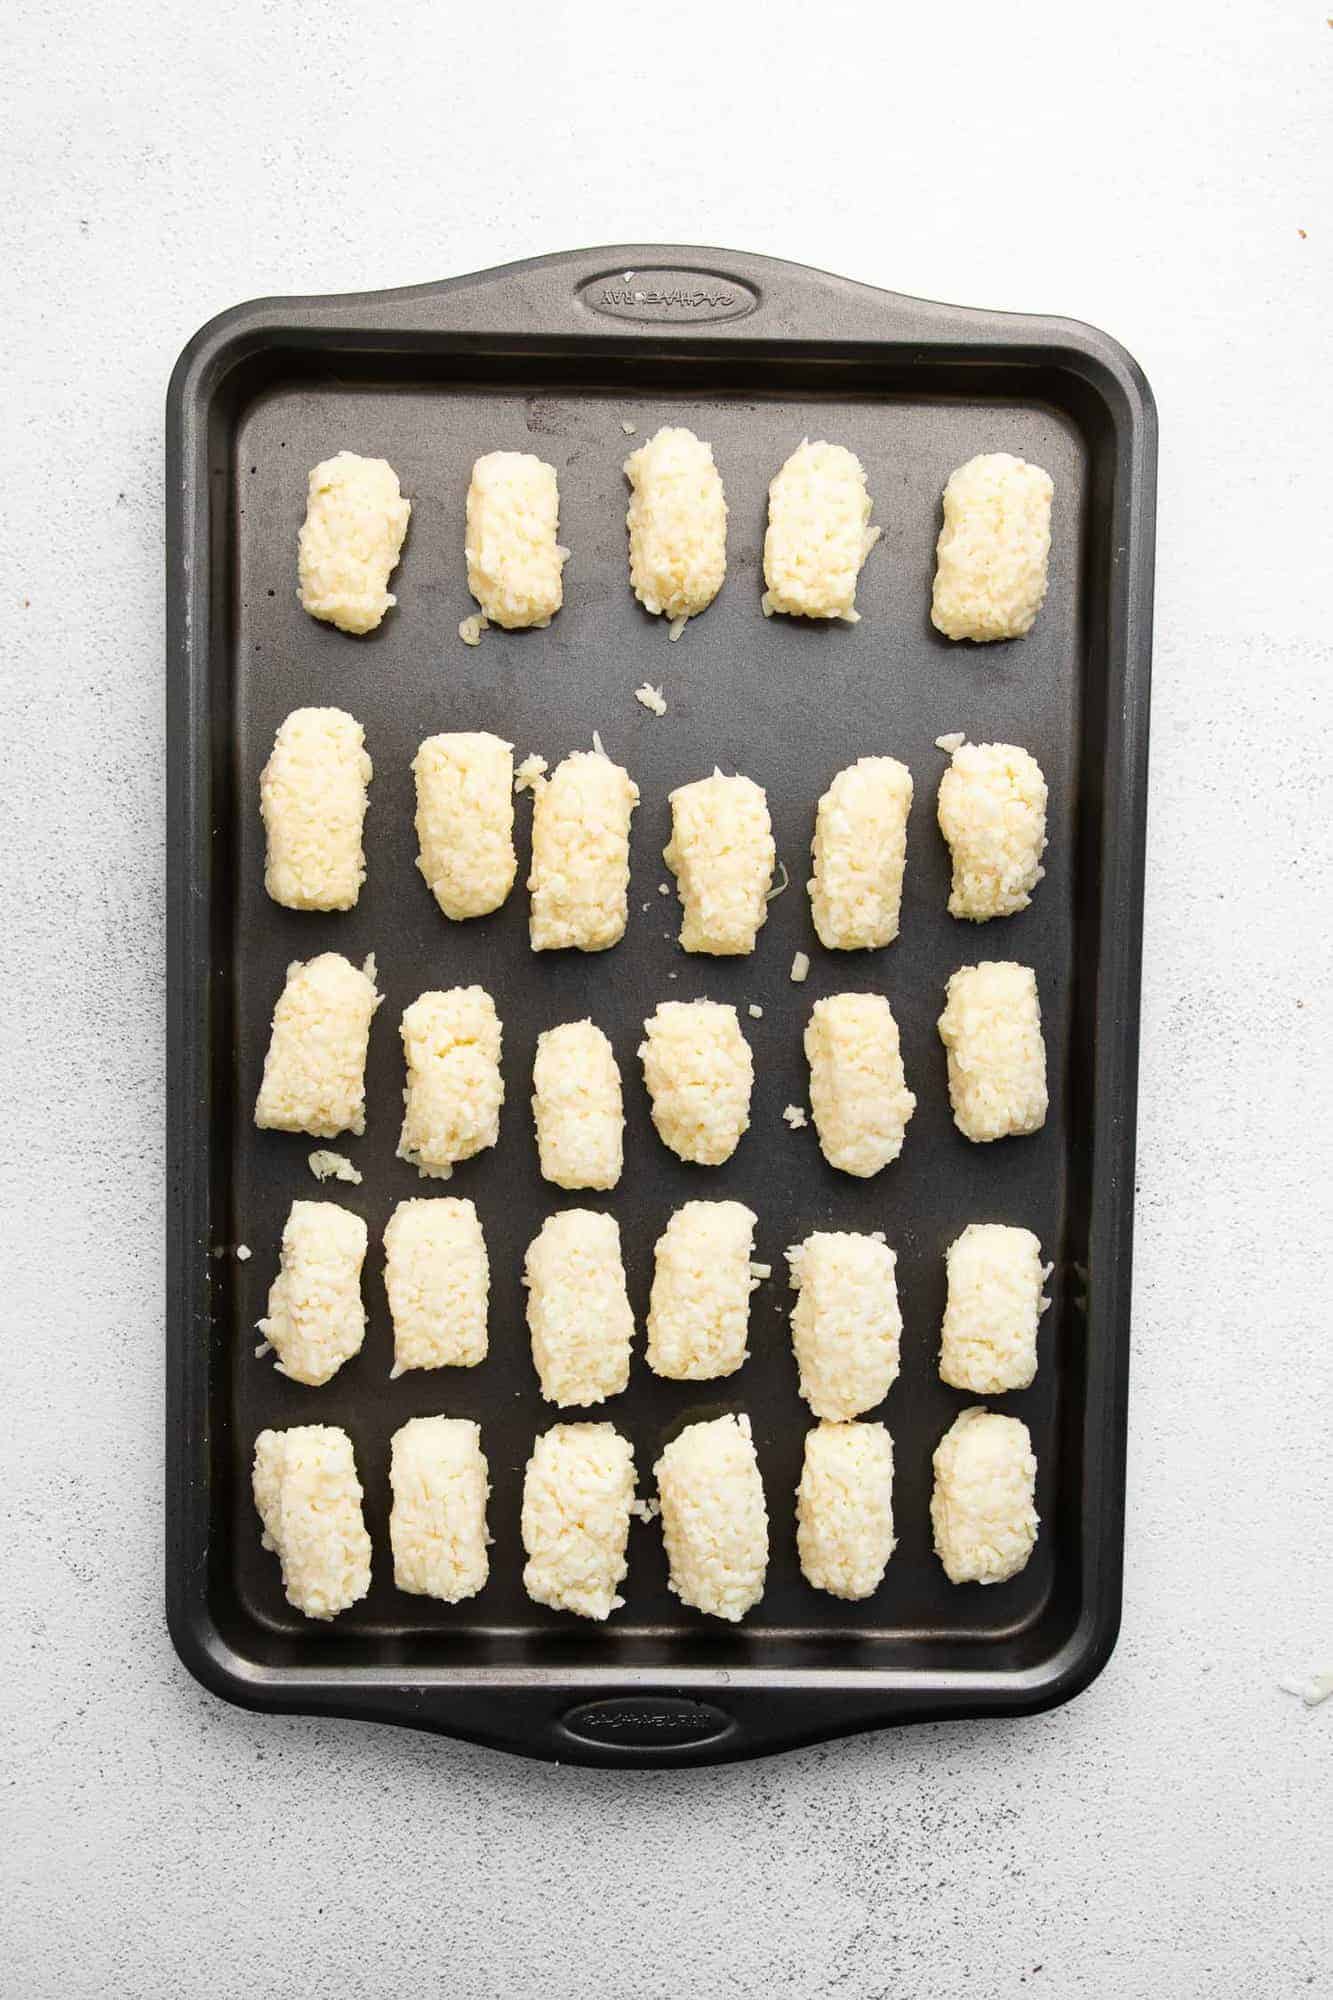 Uncooked homemade tater tots on a baking sheet.